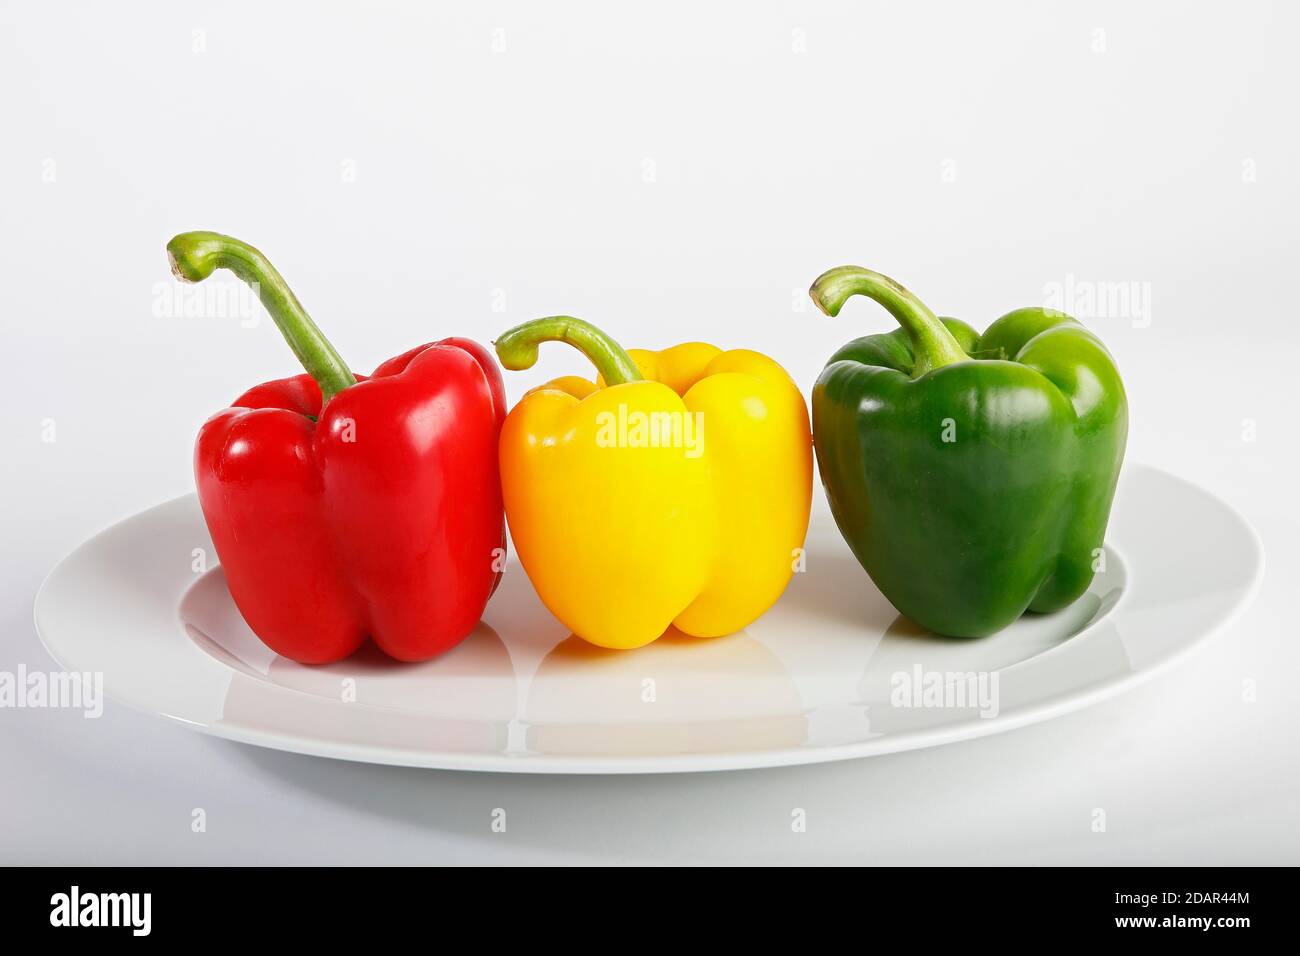 Red, yellow and green peppers (Capsicum annuum), vegetables, studio recording, Germany Stock Photo